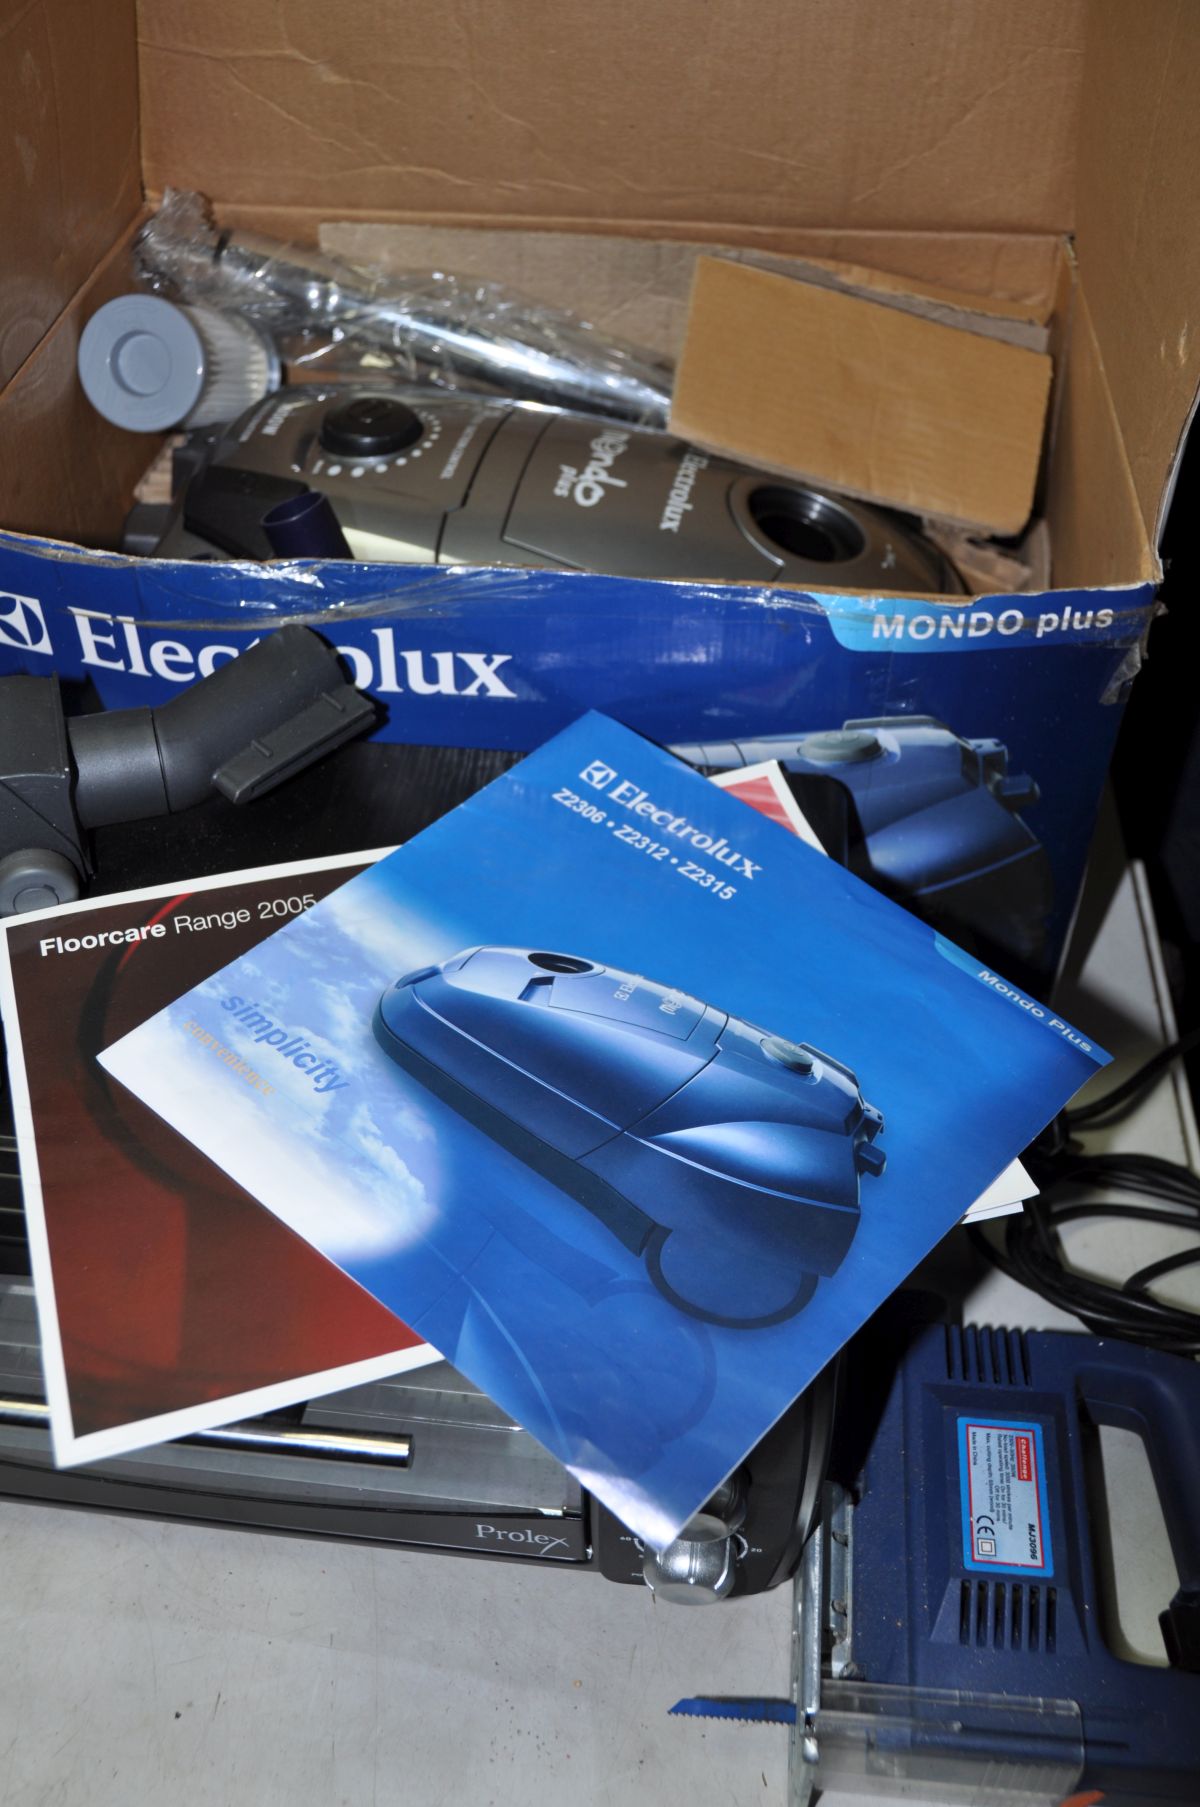 A COLLECTION OF HOUSEHOLD ELECTRICALS including a brand new in box Electrolux Mondo Plus vacuum - Image 4 of 4